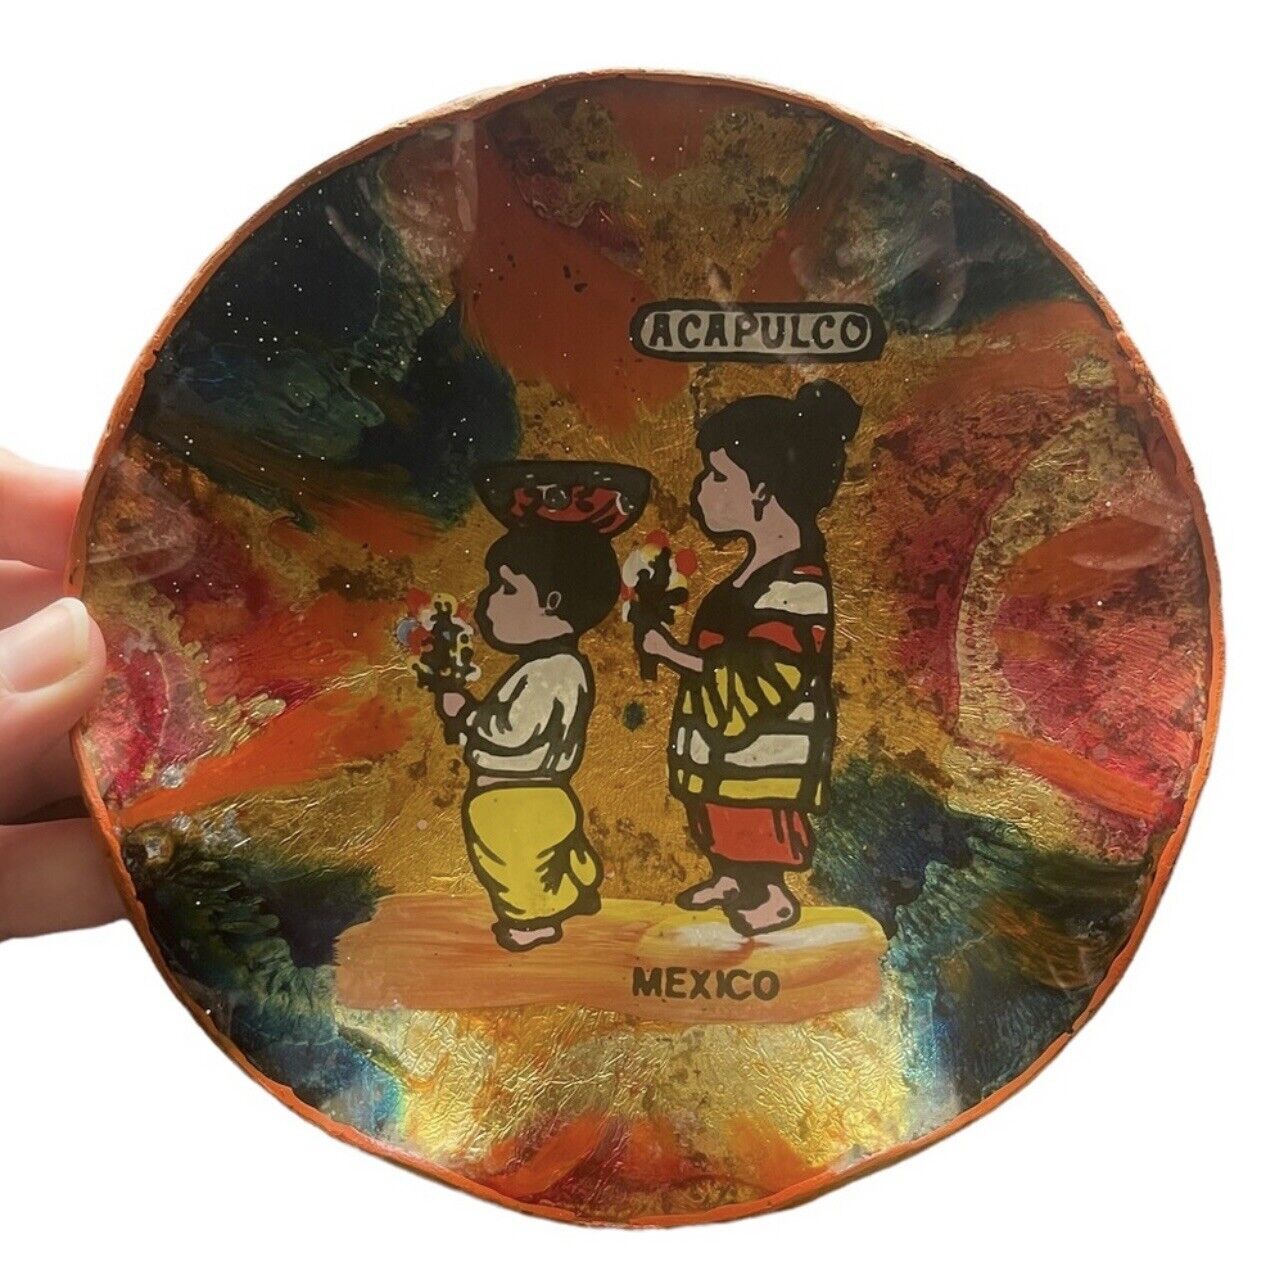 Vintage Hand-painted Acapulco, Mexico Colorful Glossy Plate Decoration